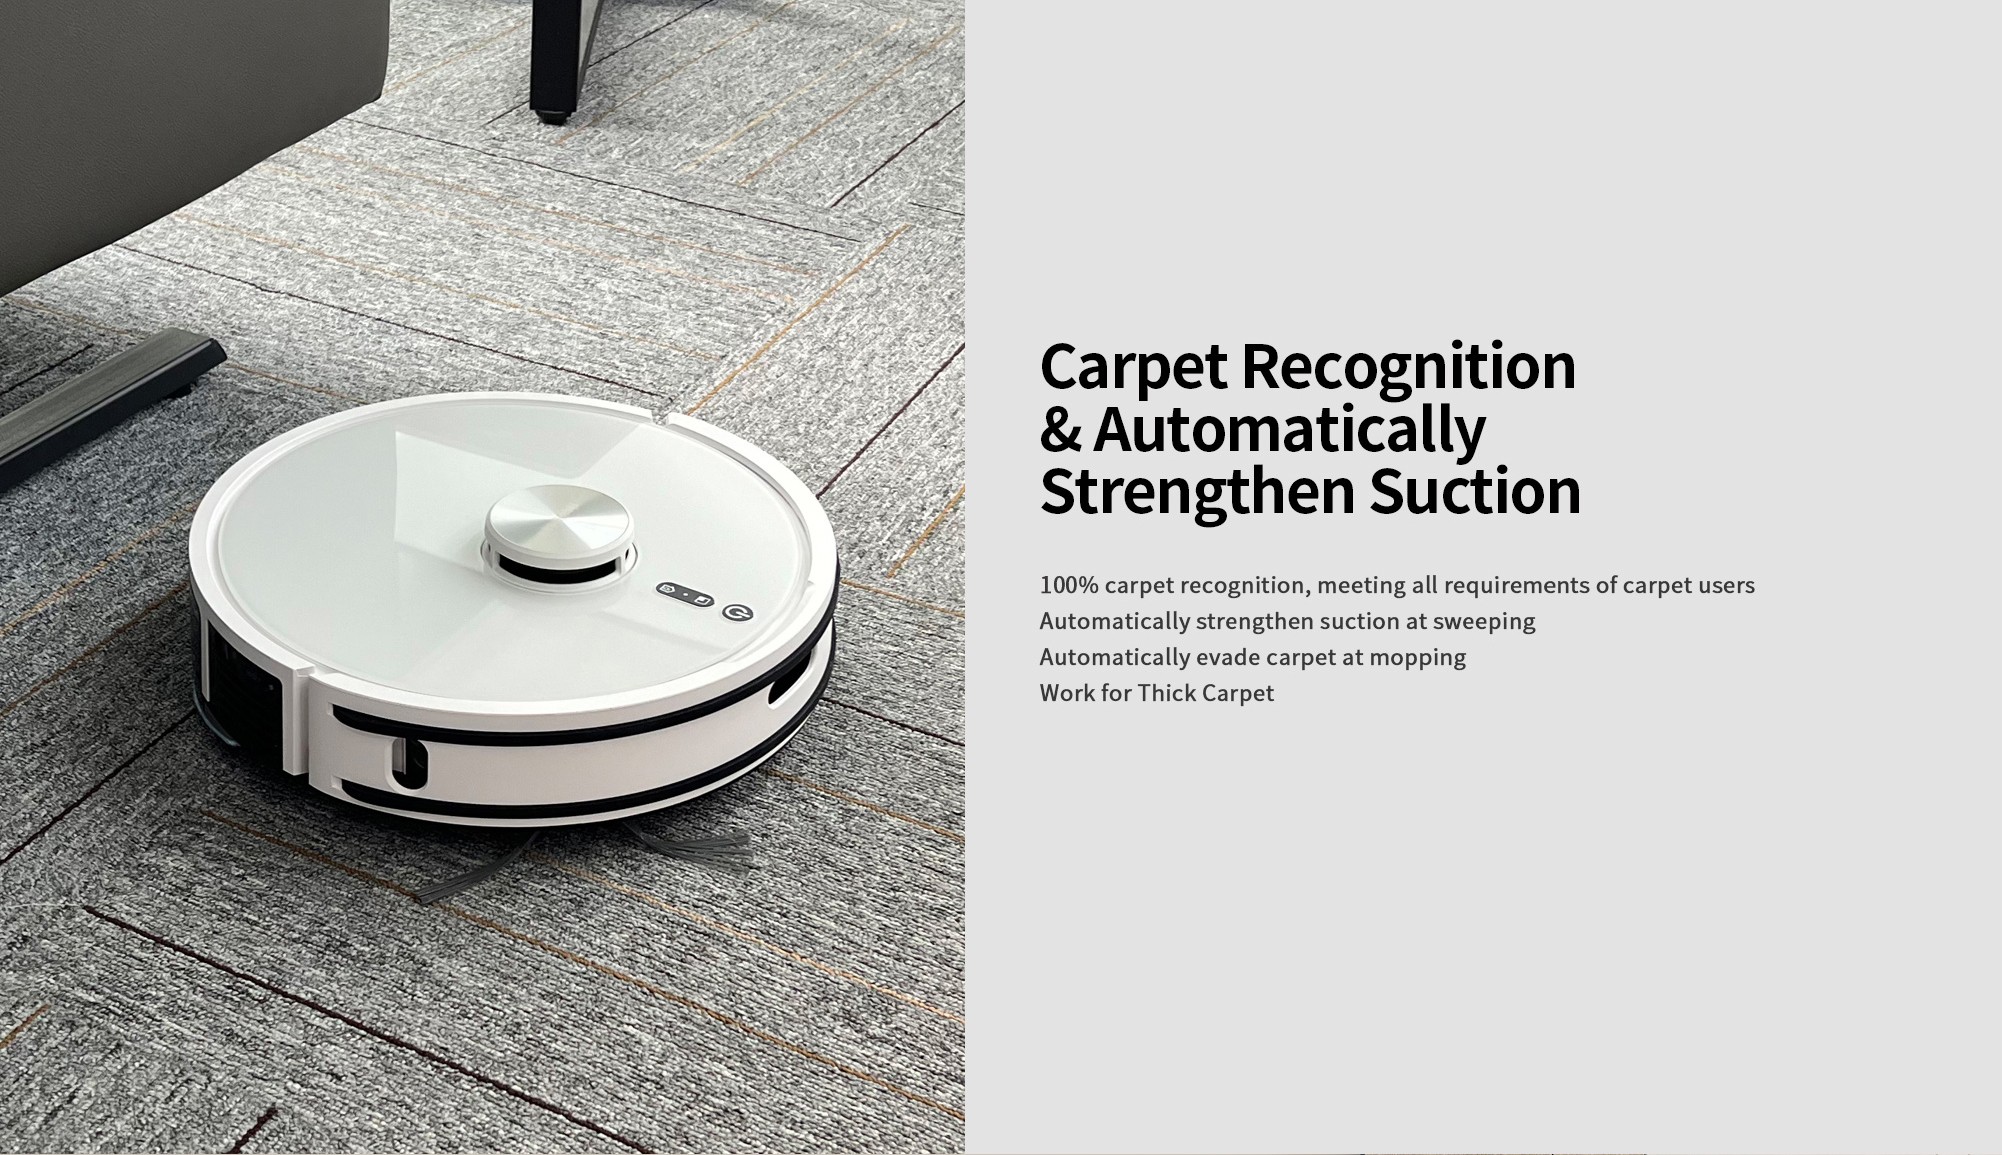 Smart-Home-Appliances-Robot-Vacuum-and-Mop-Combo-Seedream-SM10191-WiFi-App-Robotic-Vacuum-Cleaner-with-Schedule-2-in-1-Mopping-Robot-Vacuum-with-Watertank-and-Dustbin-37